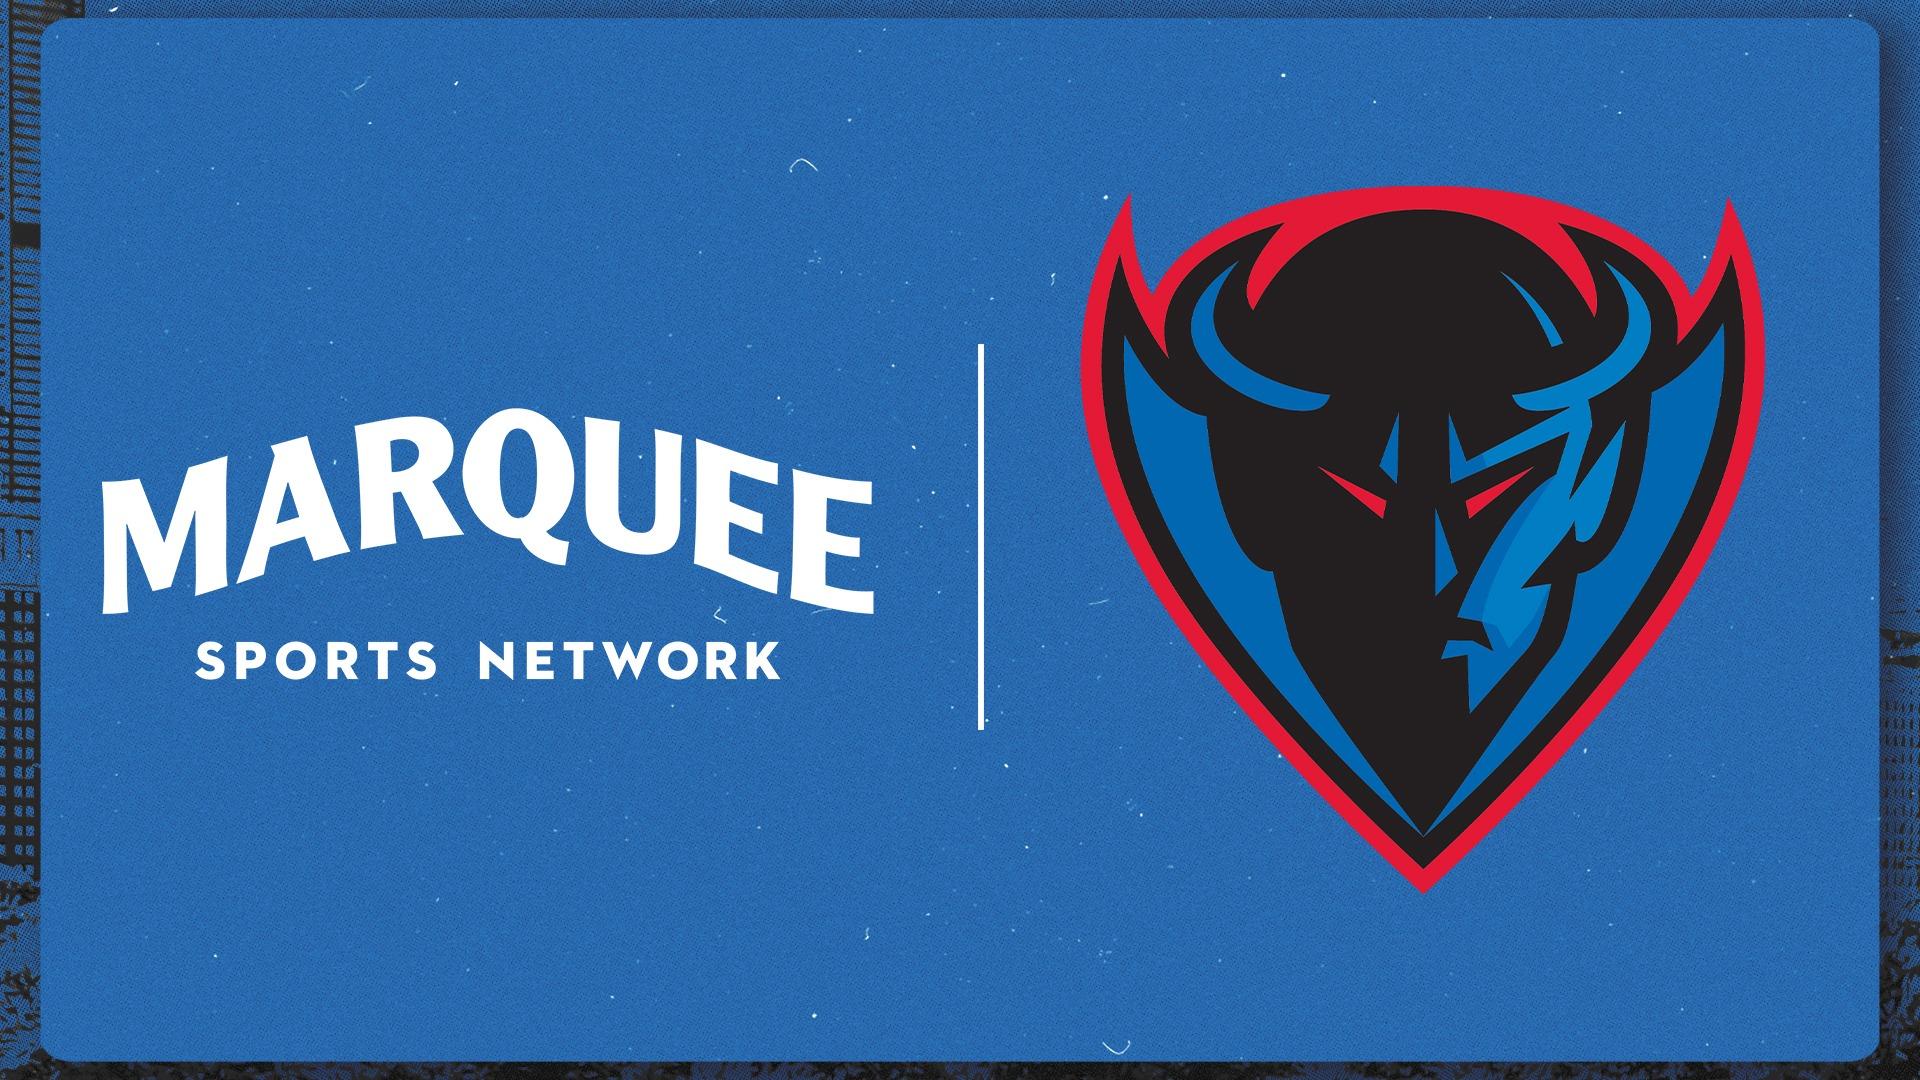 DePaul Athletics, Marquee Sports Network Announce Broadcast Partnership